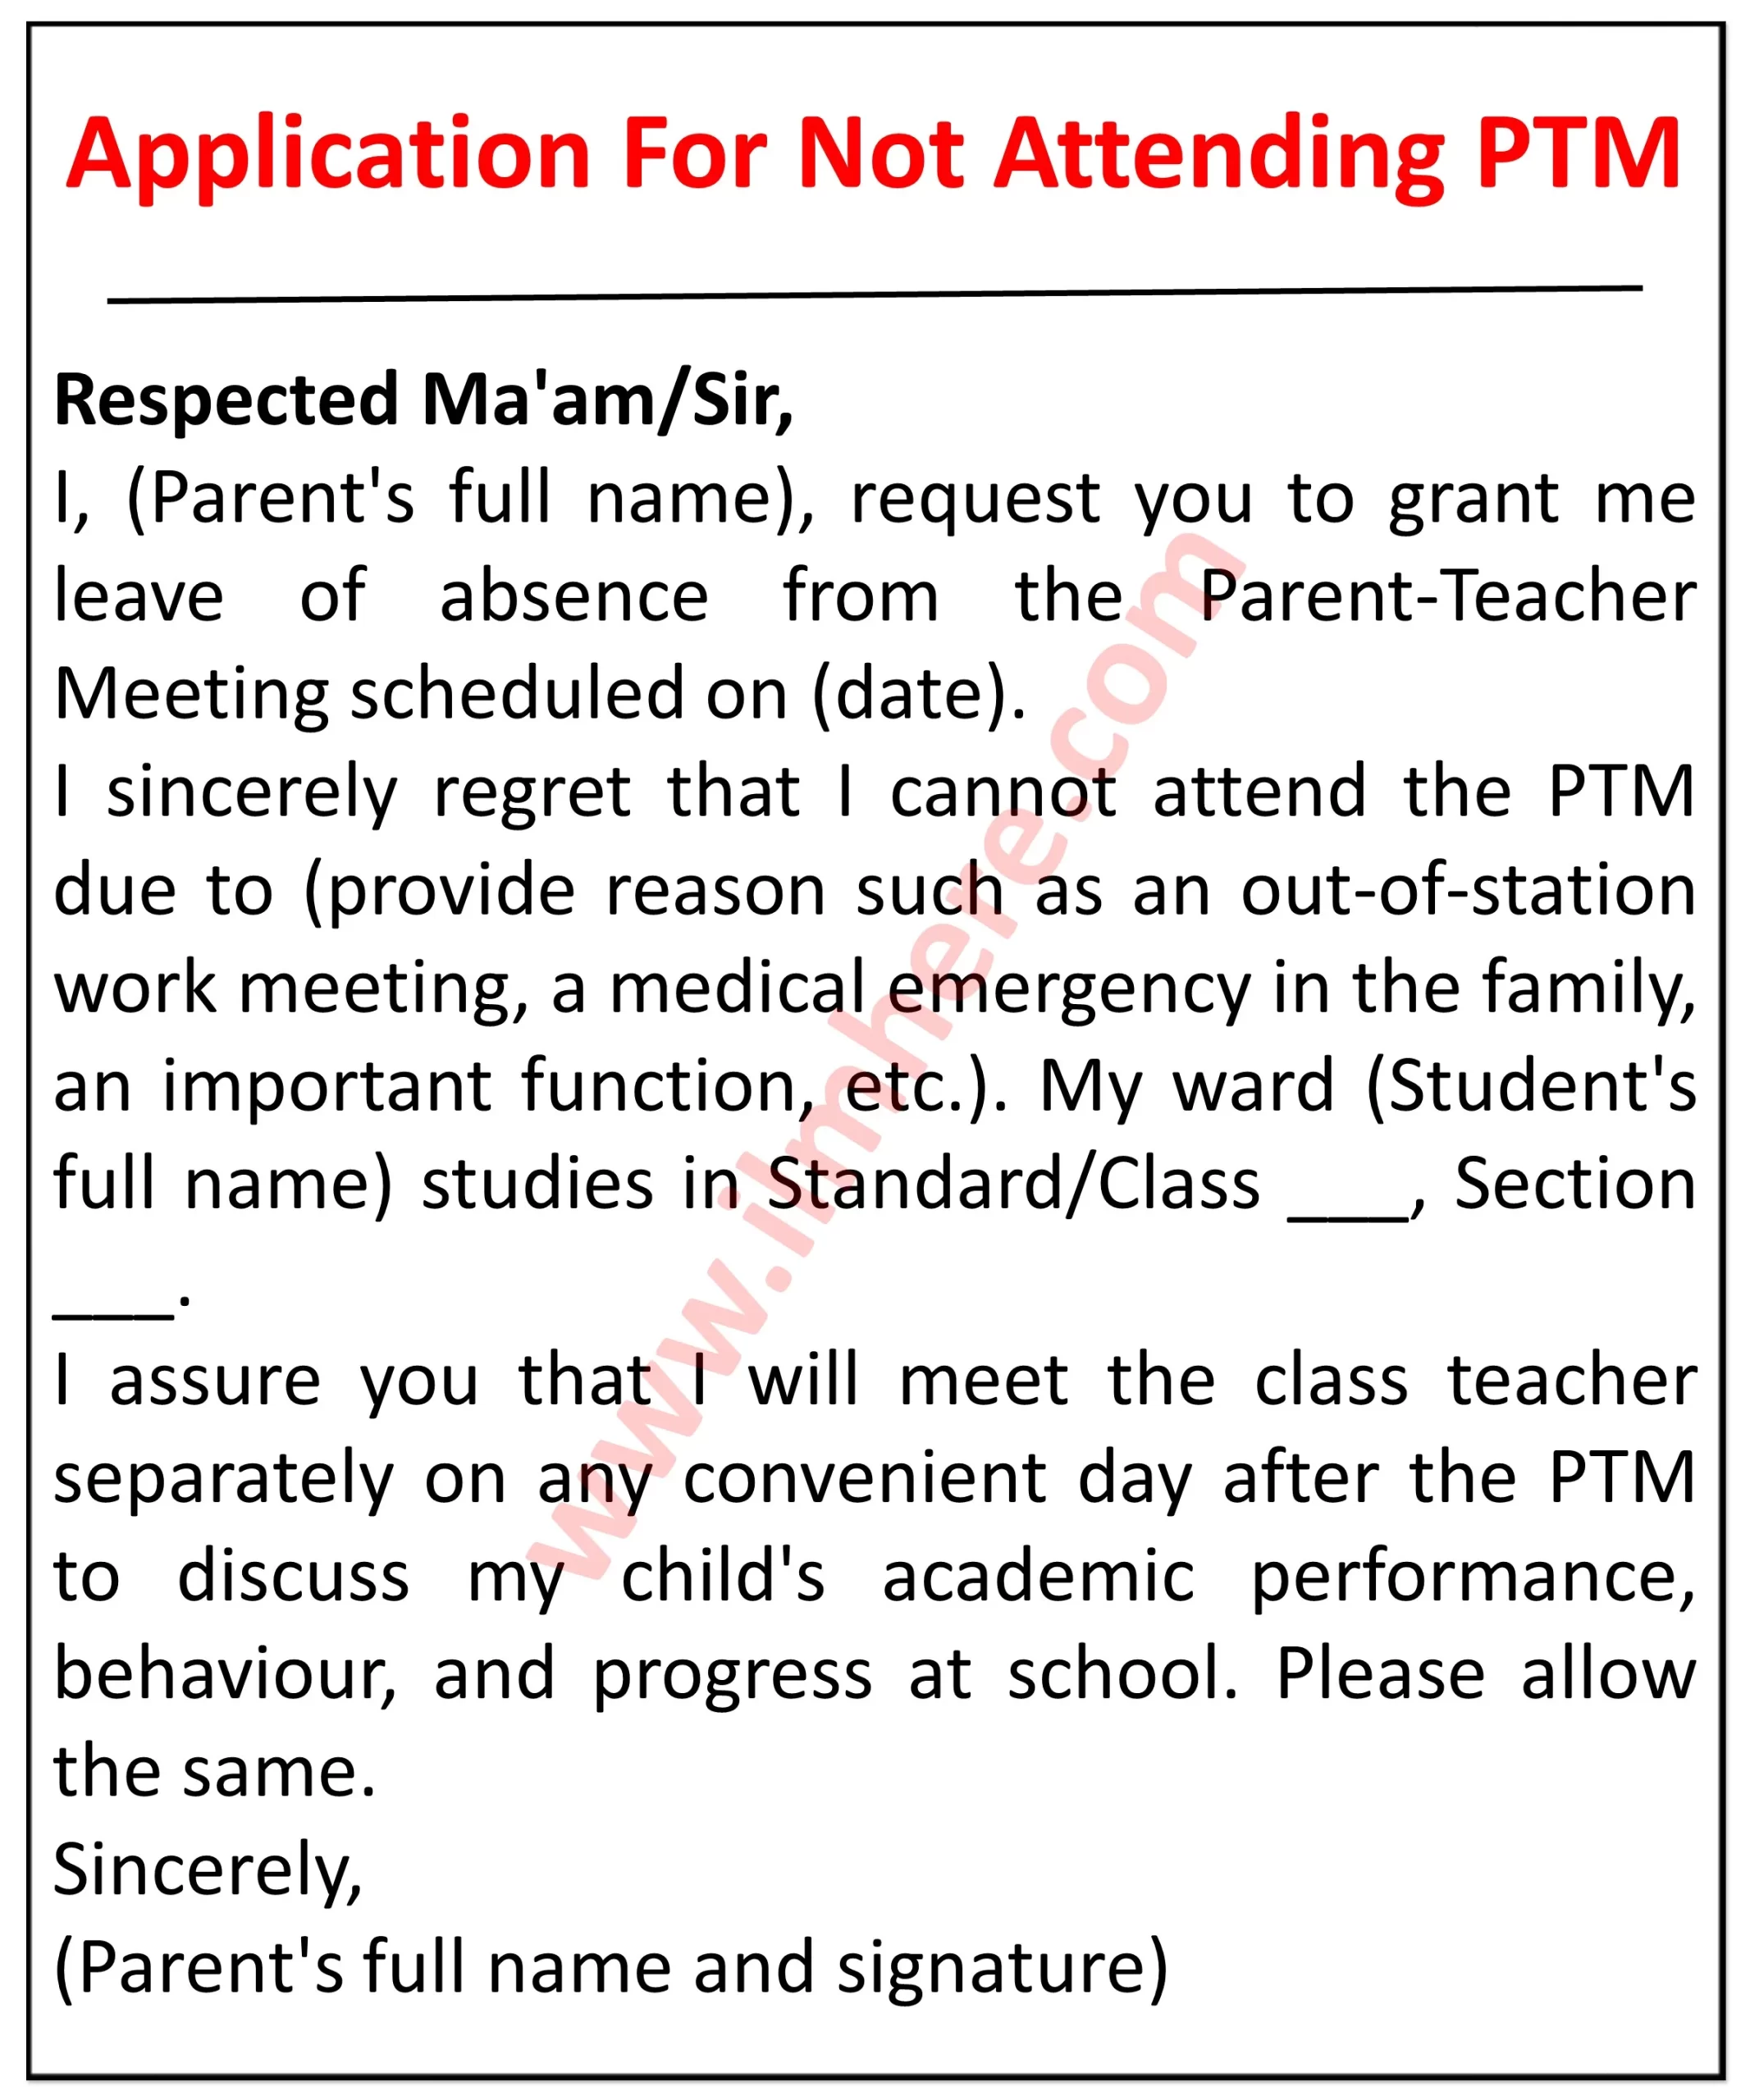 It appears to be an application form for requesting leave from a parent-teacher meeting (PTM).The form is addressed to a "Respected Ma'am/Sir," and it states that the applicant, [Parent's full name], is requesting leave of absence from the PTM scheduled for [date]. The applicant expresses regret for their inability to attend and provides [reason for absence] as the reason. They mention that their ward, [Student's full name], studies in [Standard/Class] [Section]. The applicant assures the reader that they will meet the class teacher separately on any convenient day after the PTM to discuss their child's academic performance, behavior, and progress at school. They request permission for this meeting. Finally, the applicant signs the form with their full name and signature. Here are some additional details that I can see in the image: The form is printed on blue paper. There is a decorative border around the edge of the form. The font used is Arial. The form is not dated.